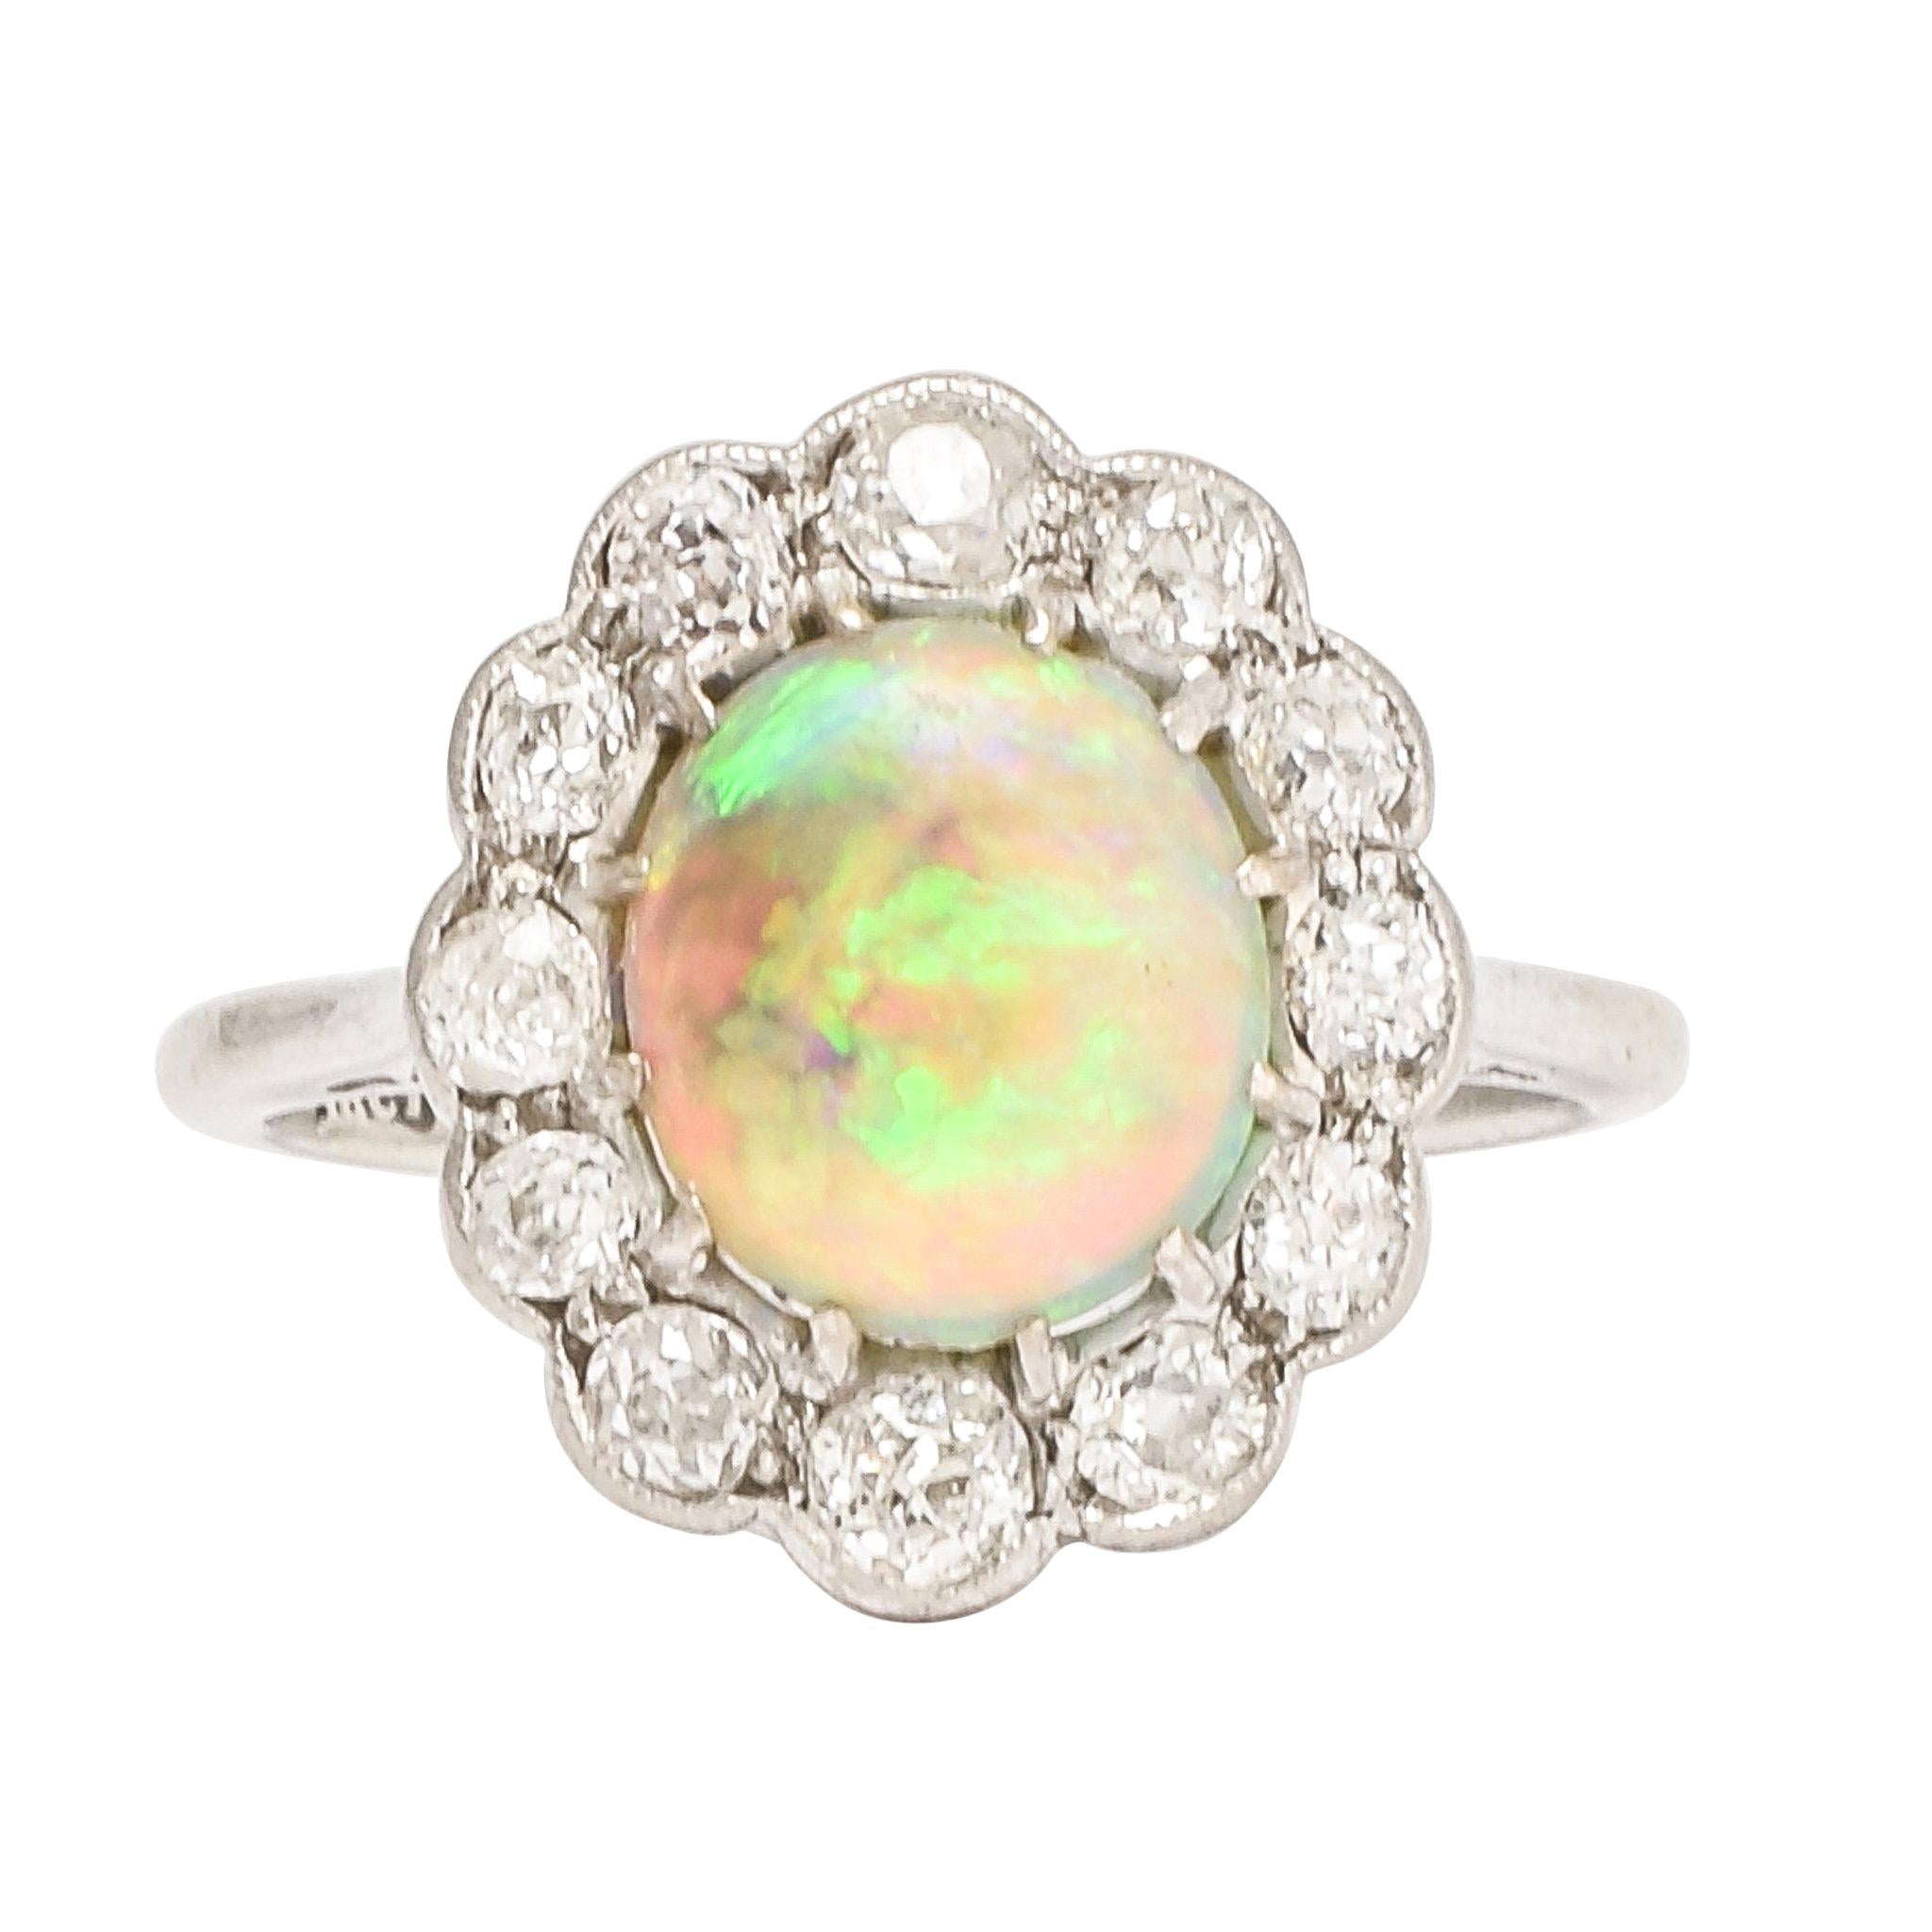 Antique Edwardian Opal Old Cut Diamond Cluster Ring